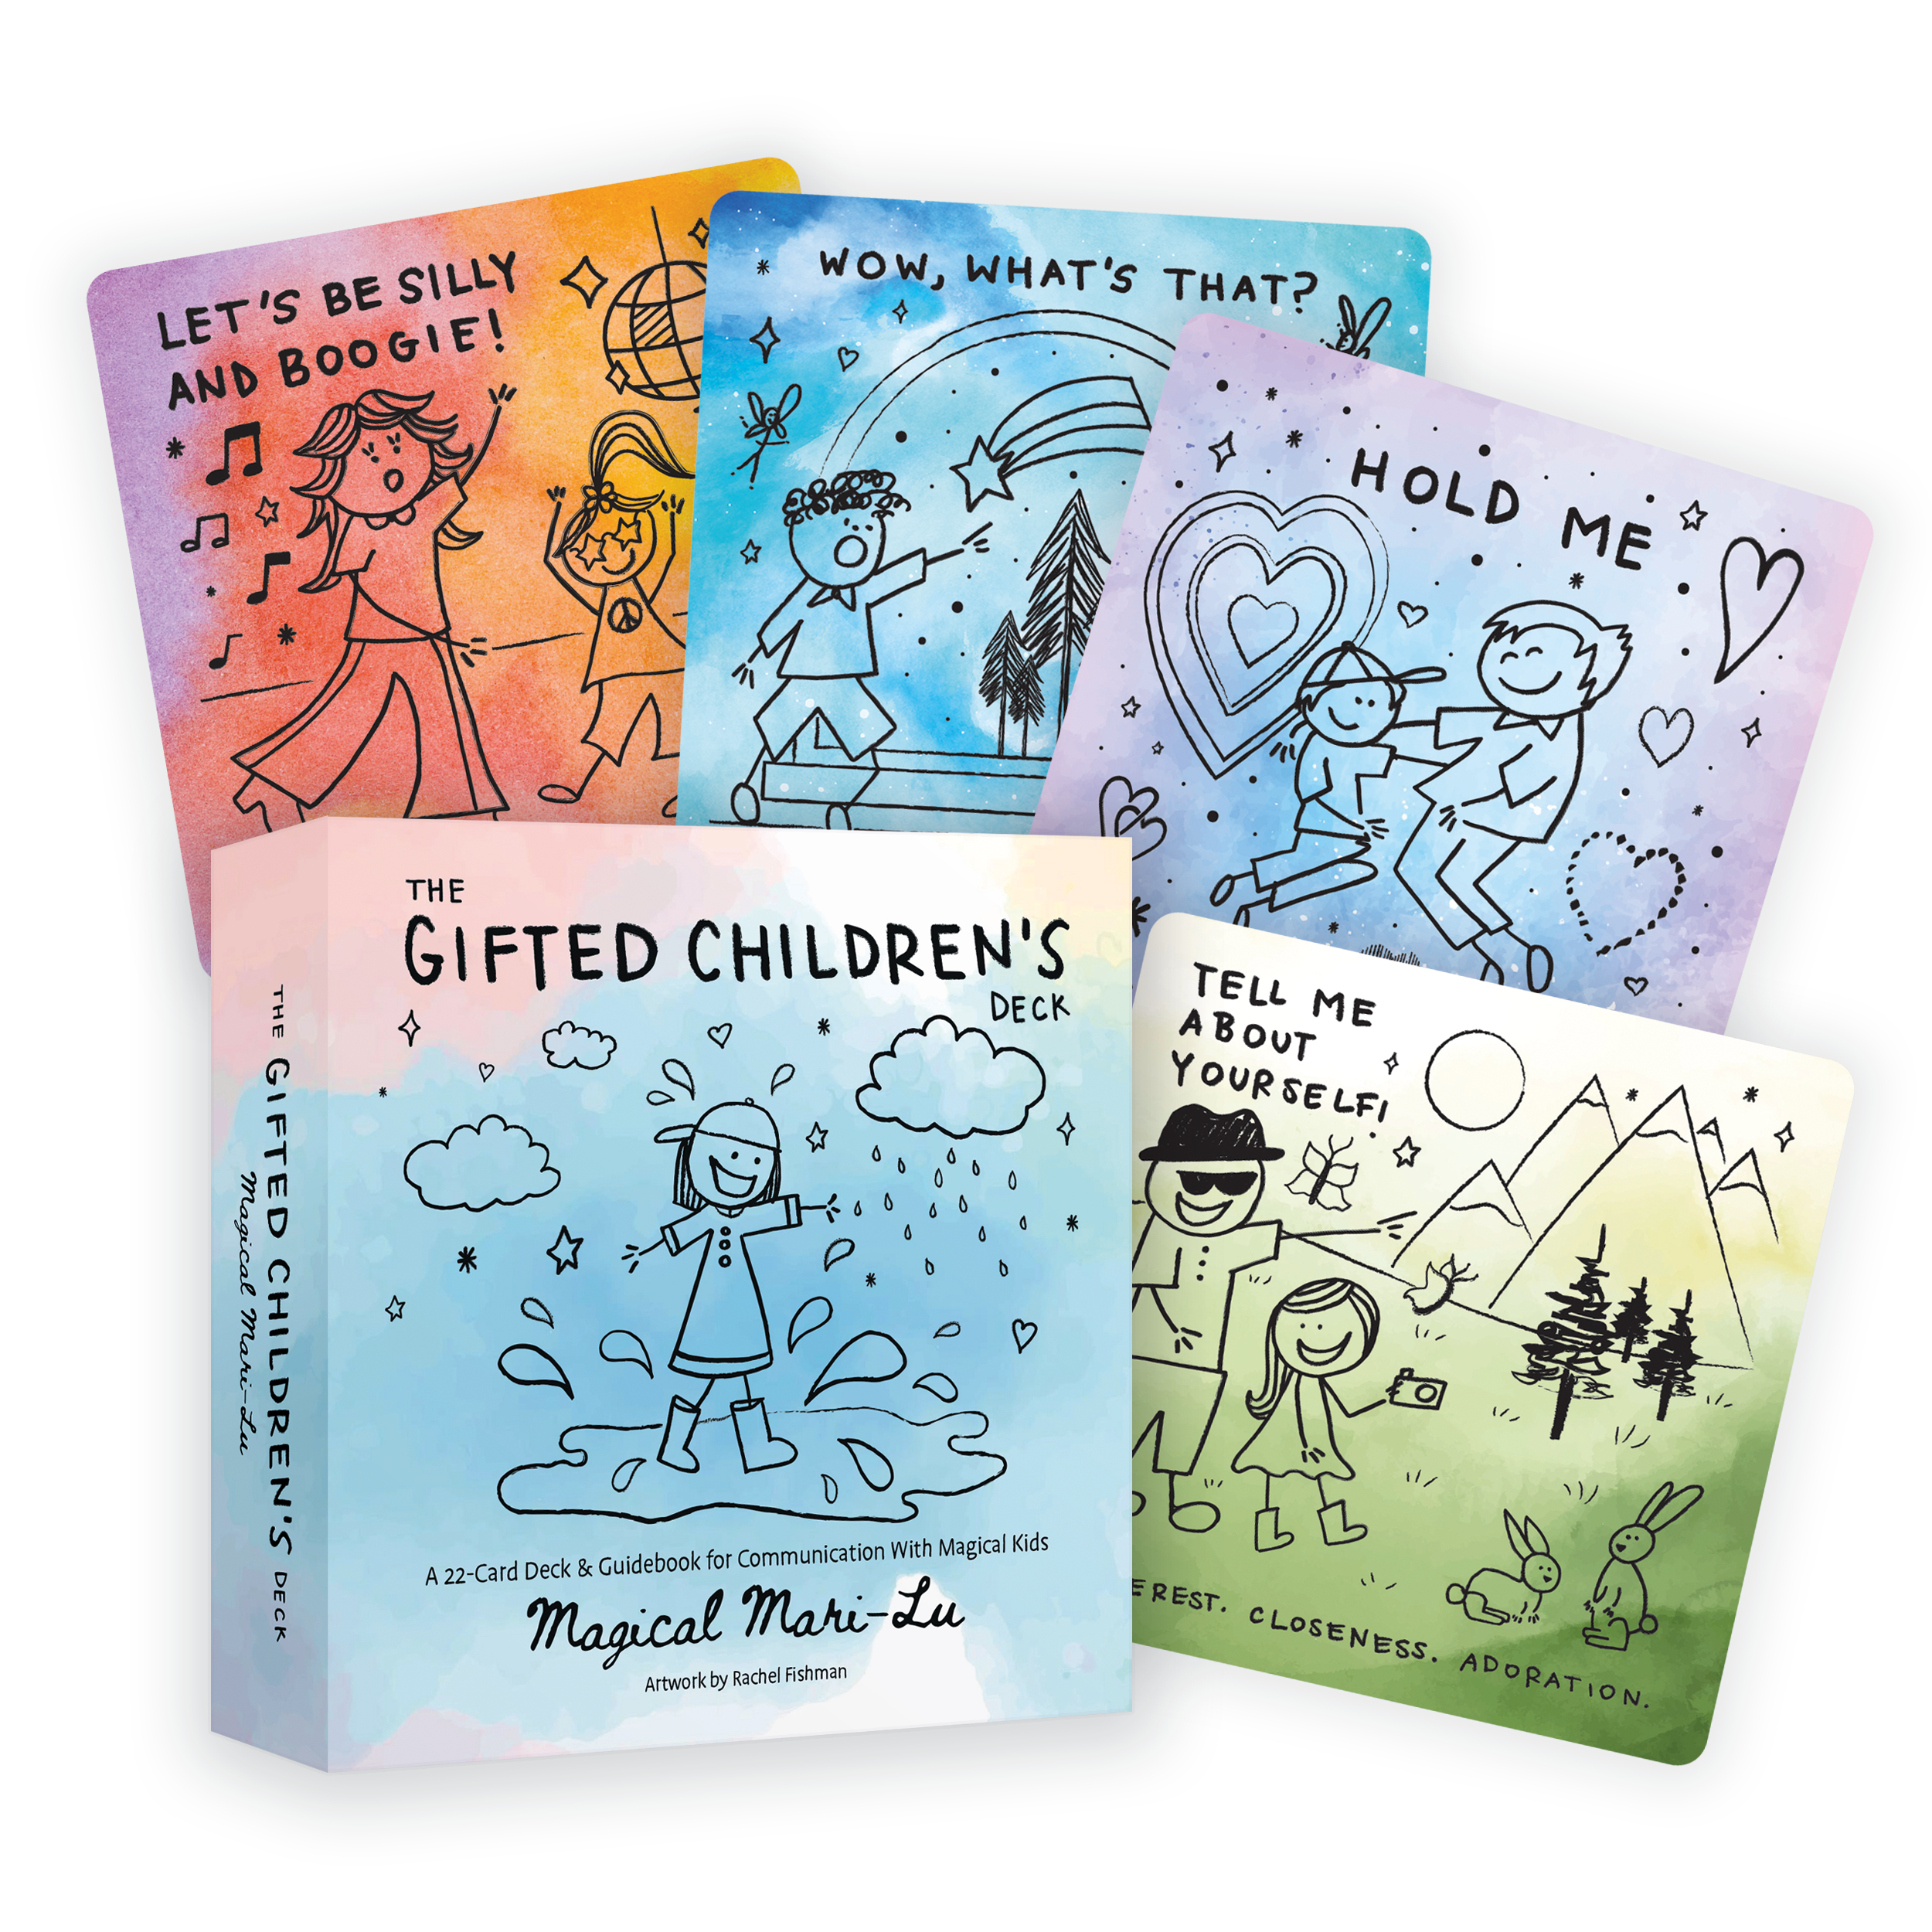 The Gifted Children's Deck